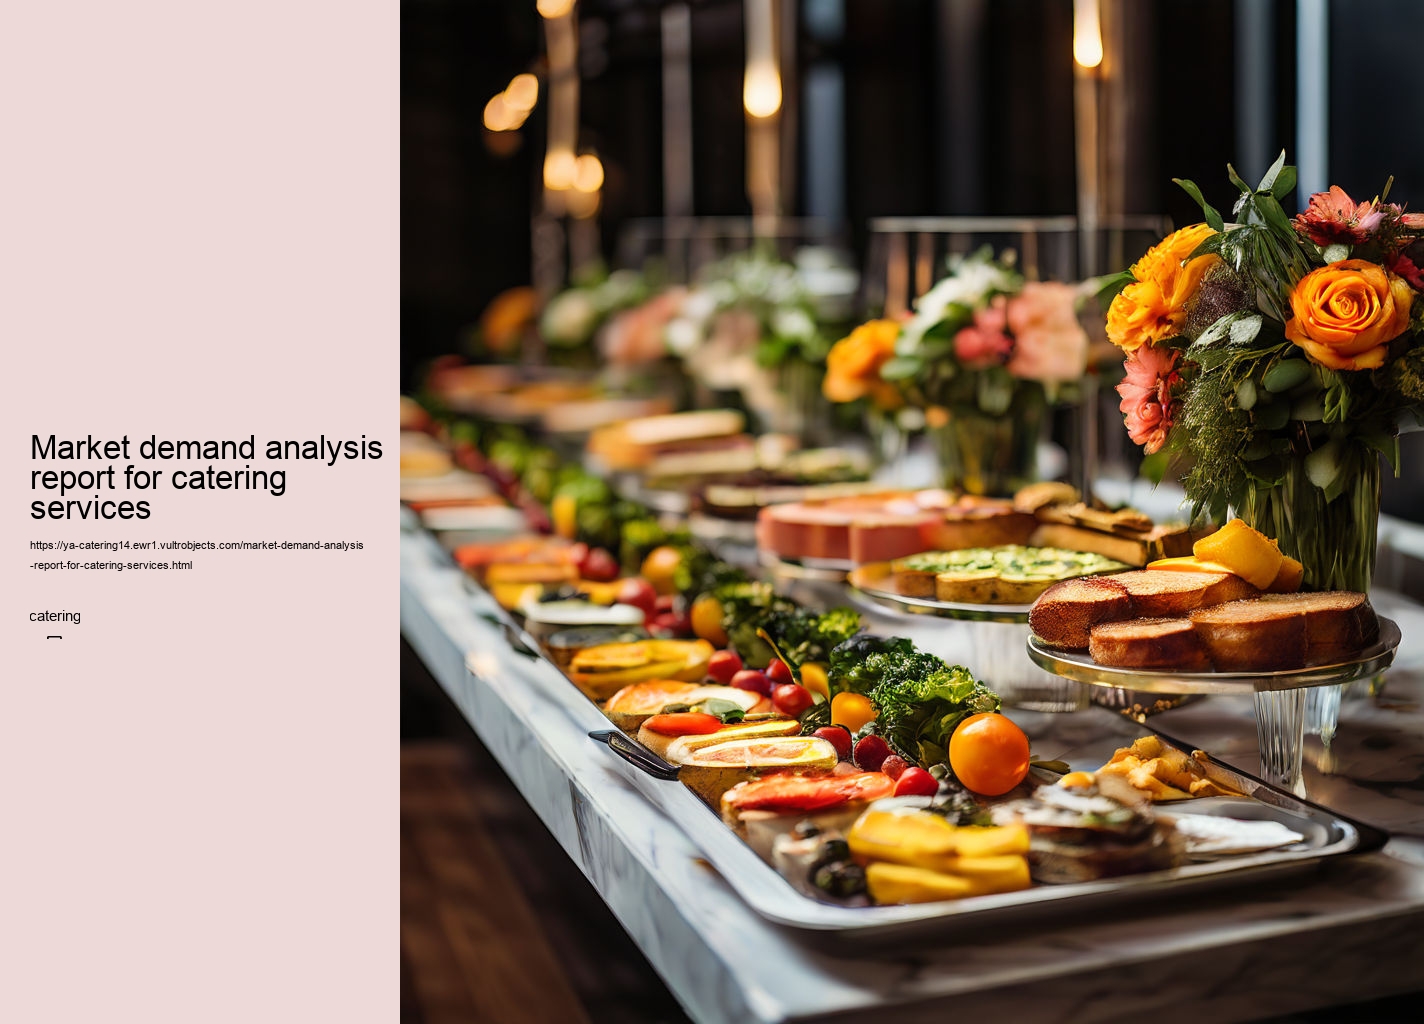 Market demand analysis report for catering services